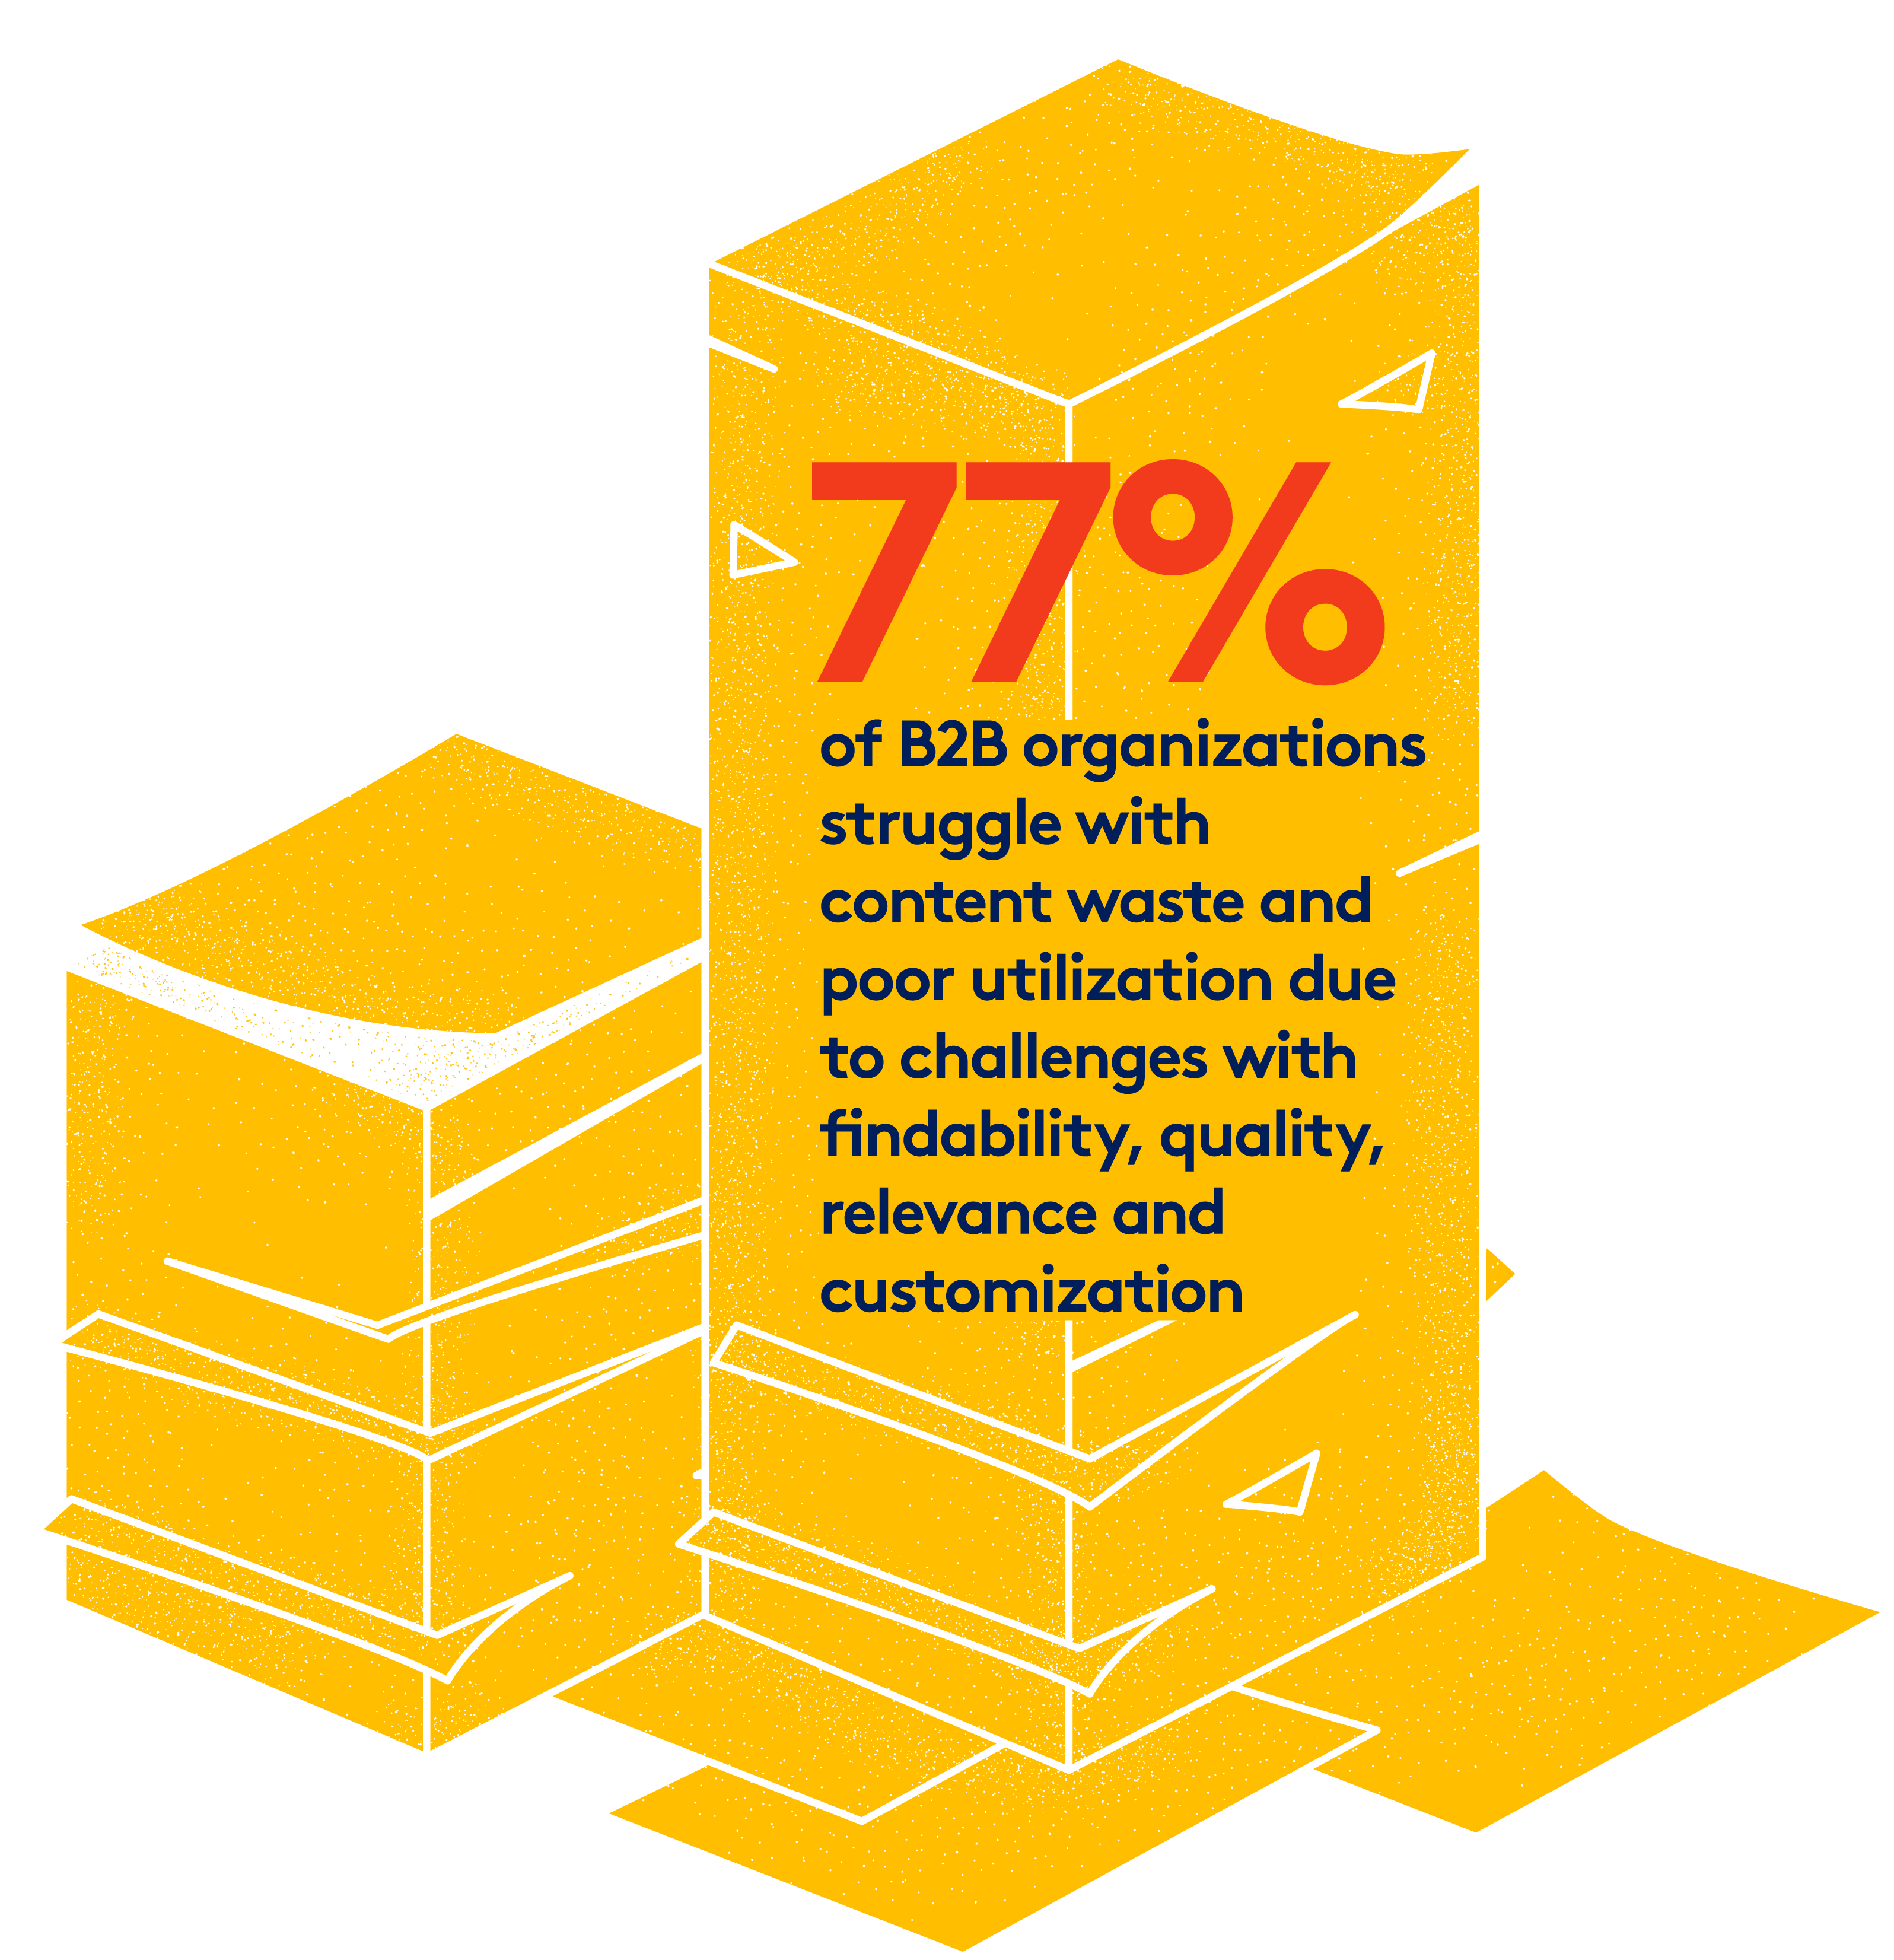 Large stack of papers: 77% of B2B organizations struggle with content waste & poor utilization.